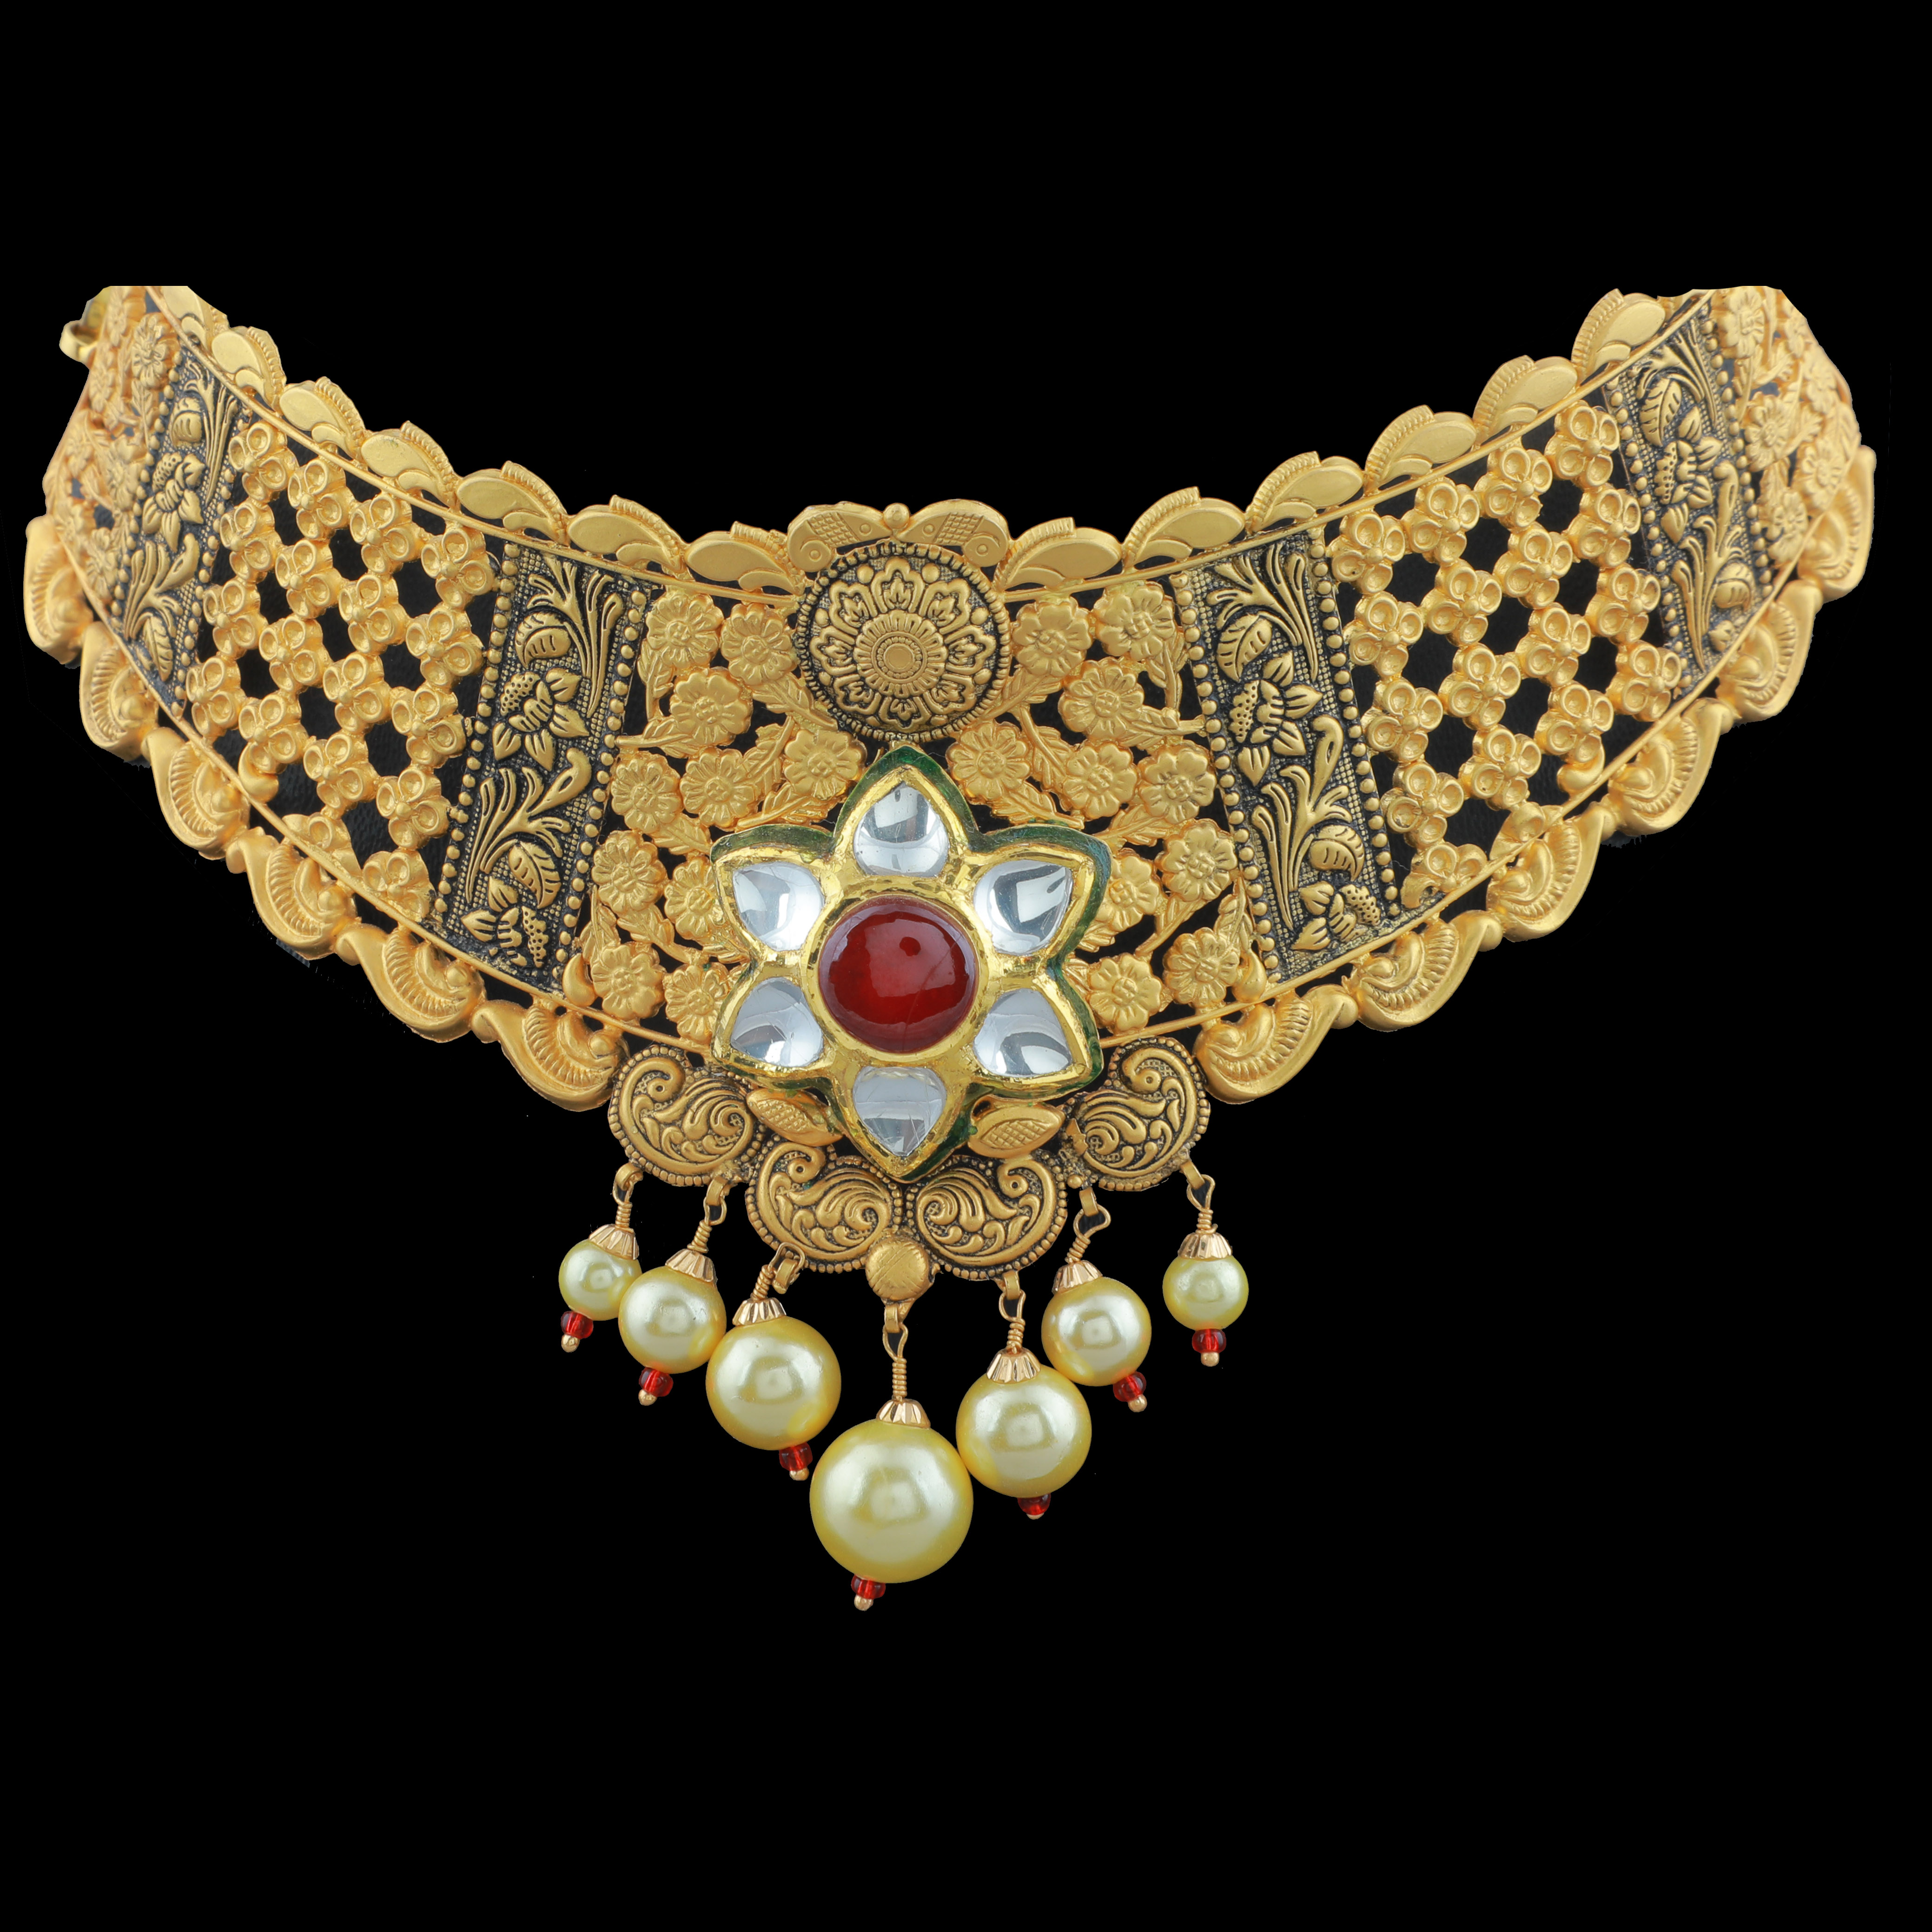 Siddhidatri Antique Gold Choker Necklace - RK Jewellers